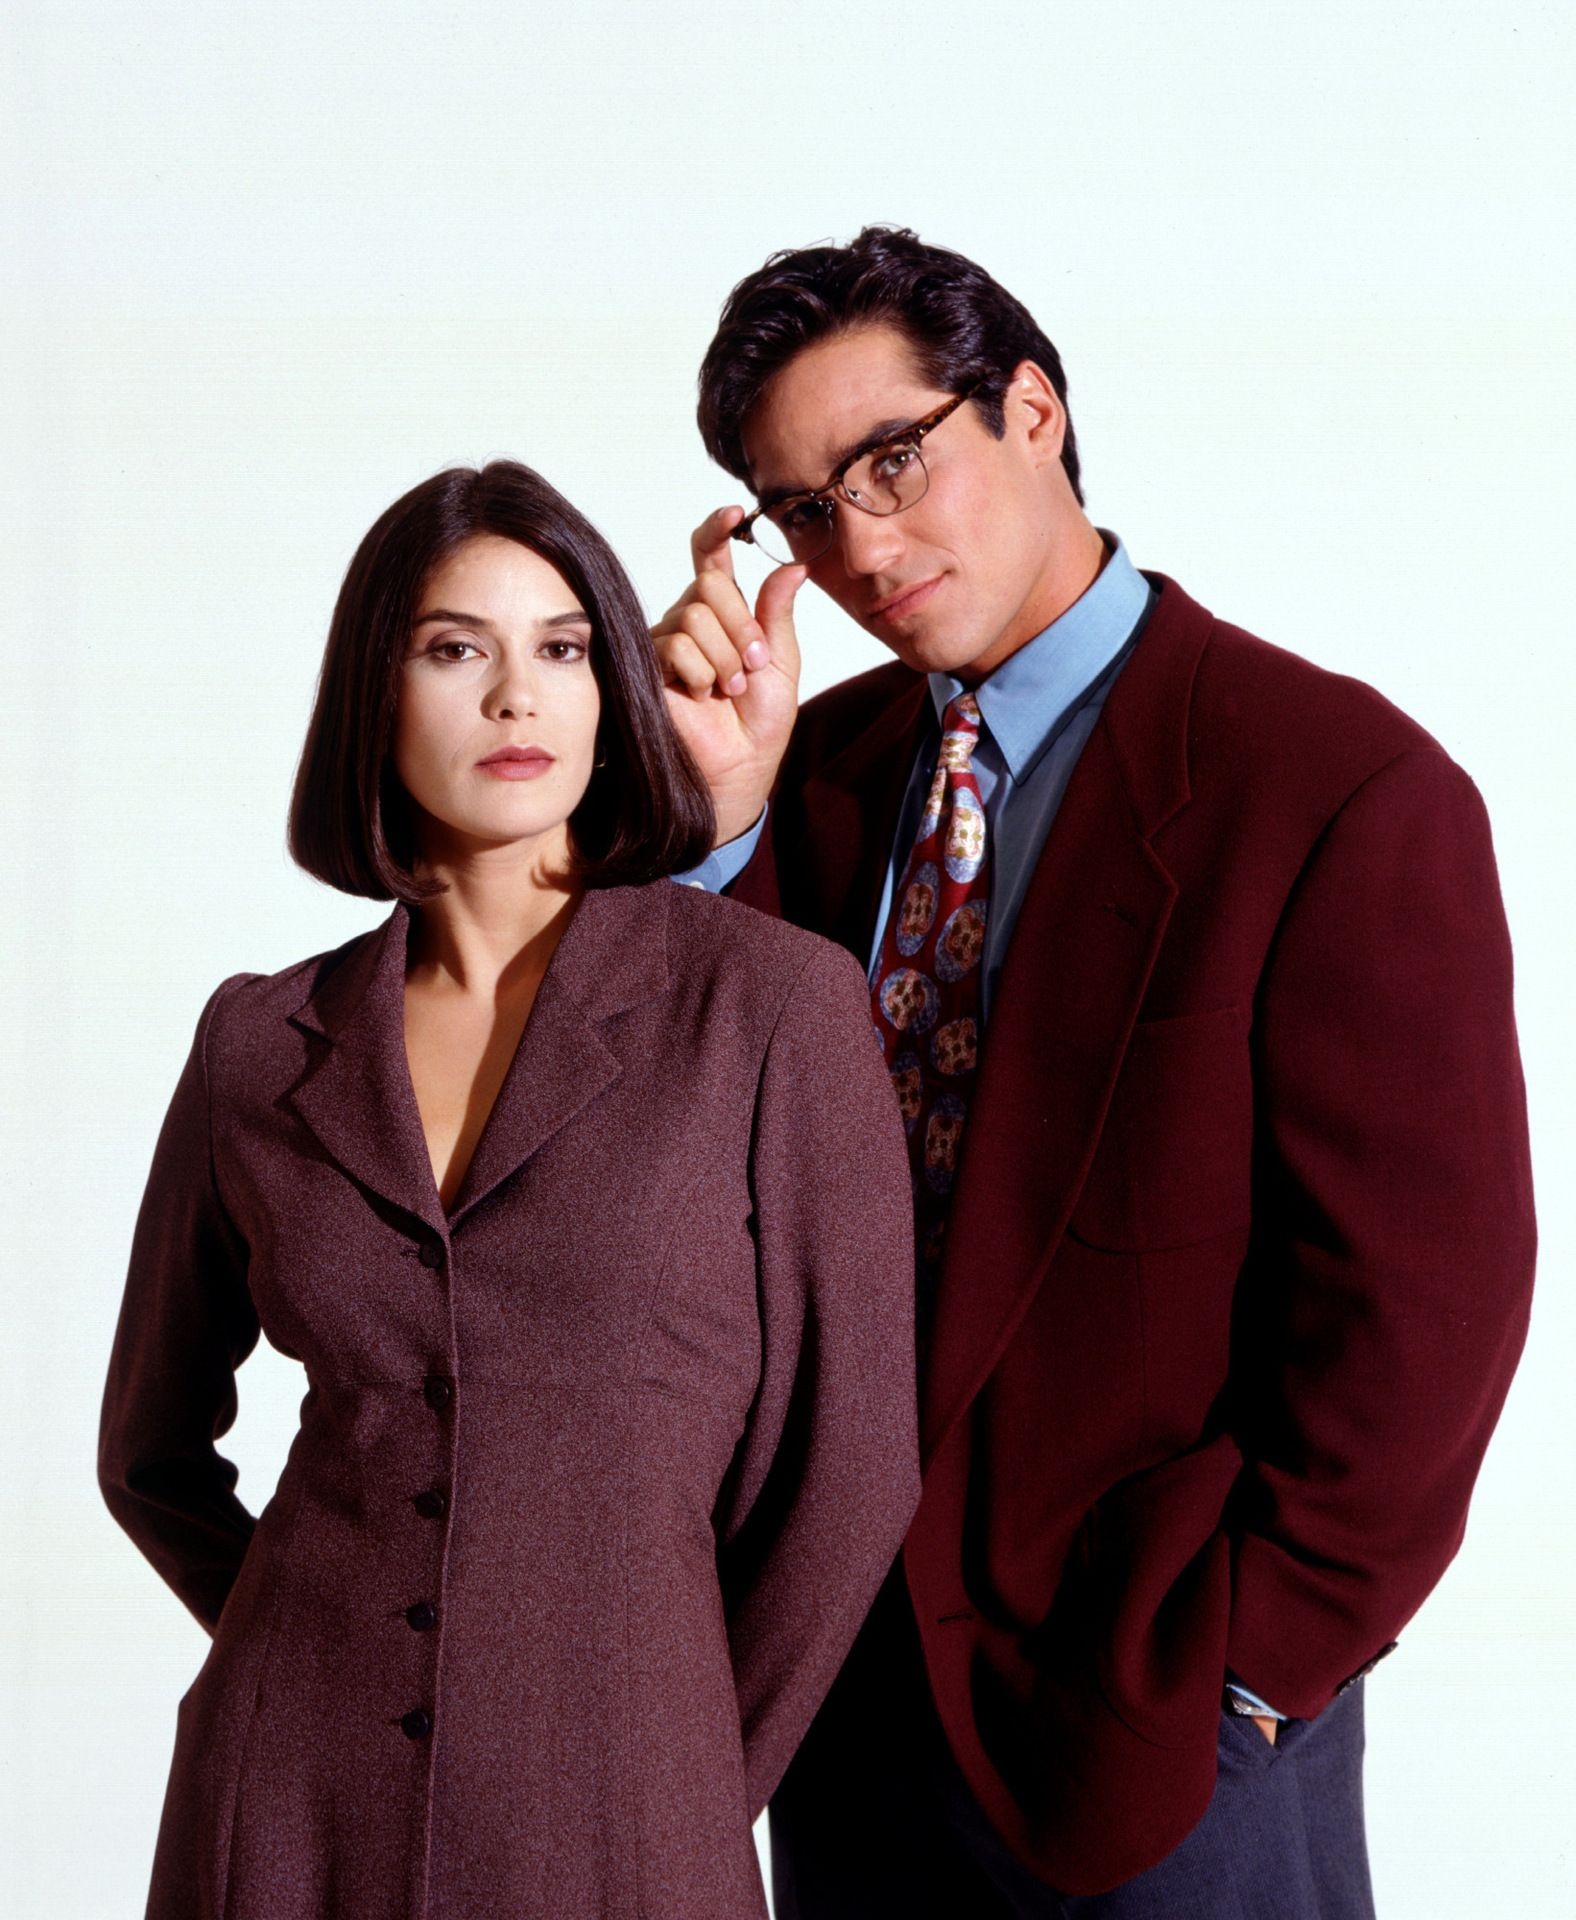 Lois and Clark: The New Adventures of Superman: Dean Cain, Teri Hatcher, Television series produced by Deborah Joy LeVine and Robert Singer. 1580x1920 HD Wallpaper.